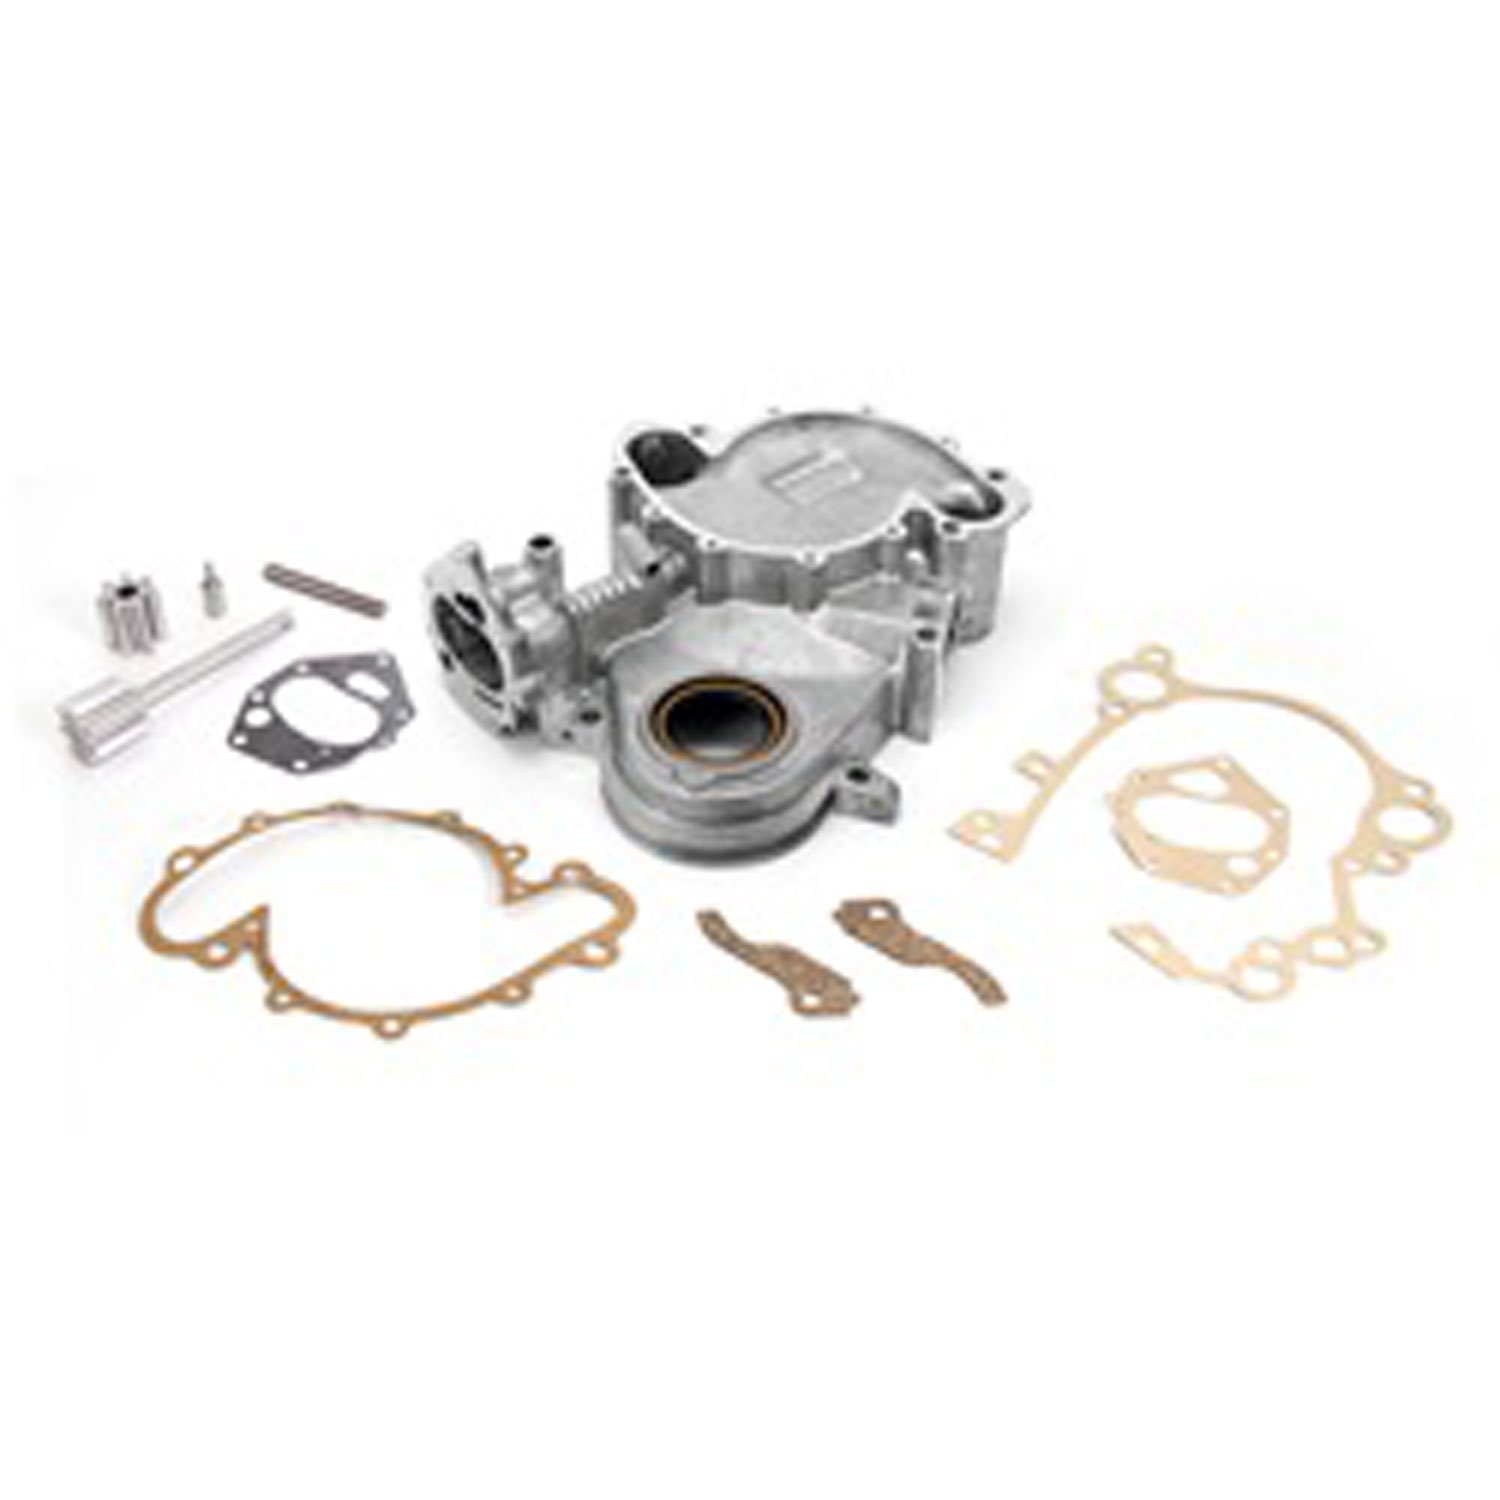 Timing Chain Cover Kit for1966-1991 AMC 290, 304, 343, 360, 390 and 401 V8 Engines